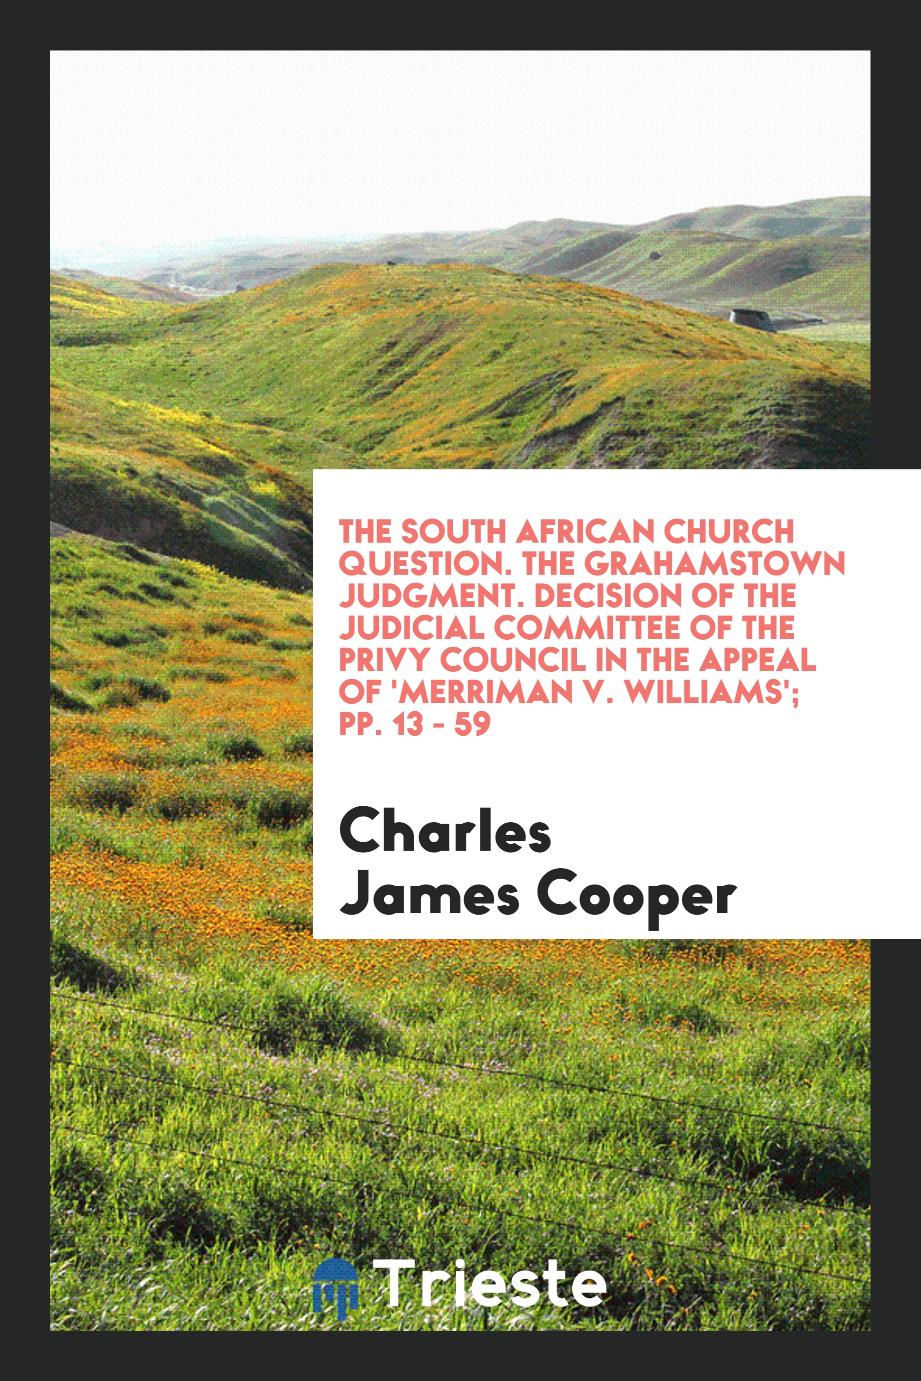 The South African church question. The Grahamstown judgment. Decision of the judicial committee of the Privy council in the appeal of 'Merriman v. Williams'; pp. 13 - 59